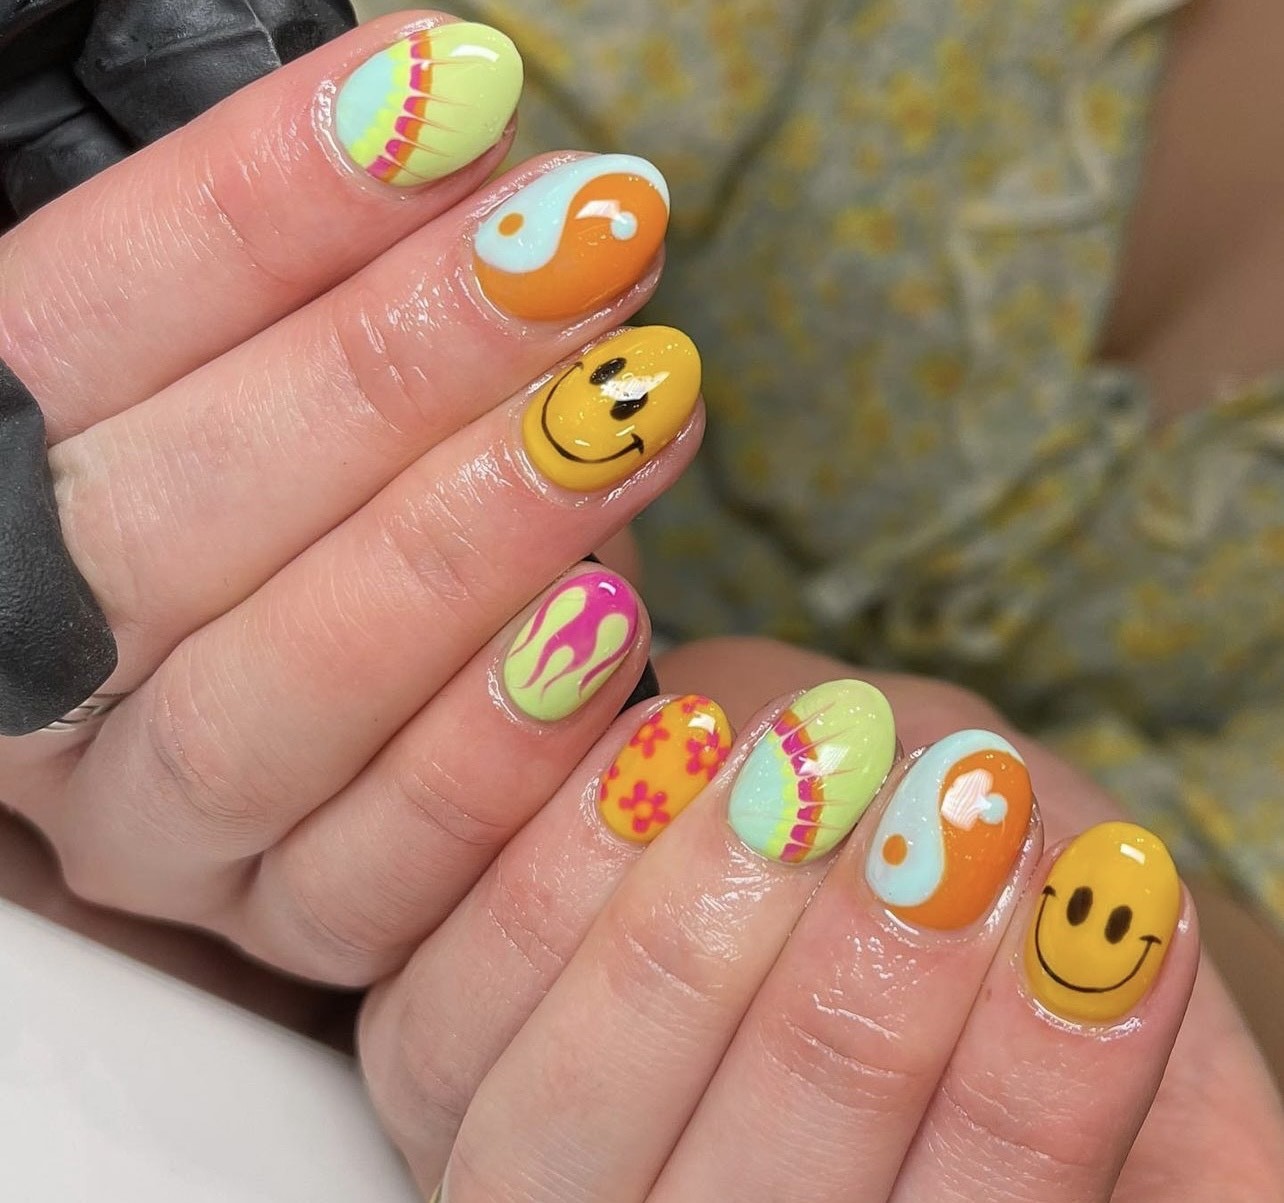 Maisie loves creating nail art especially when its crazy and colourful